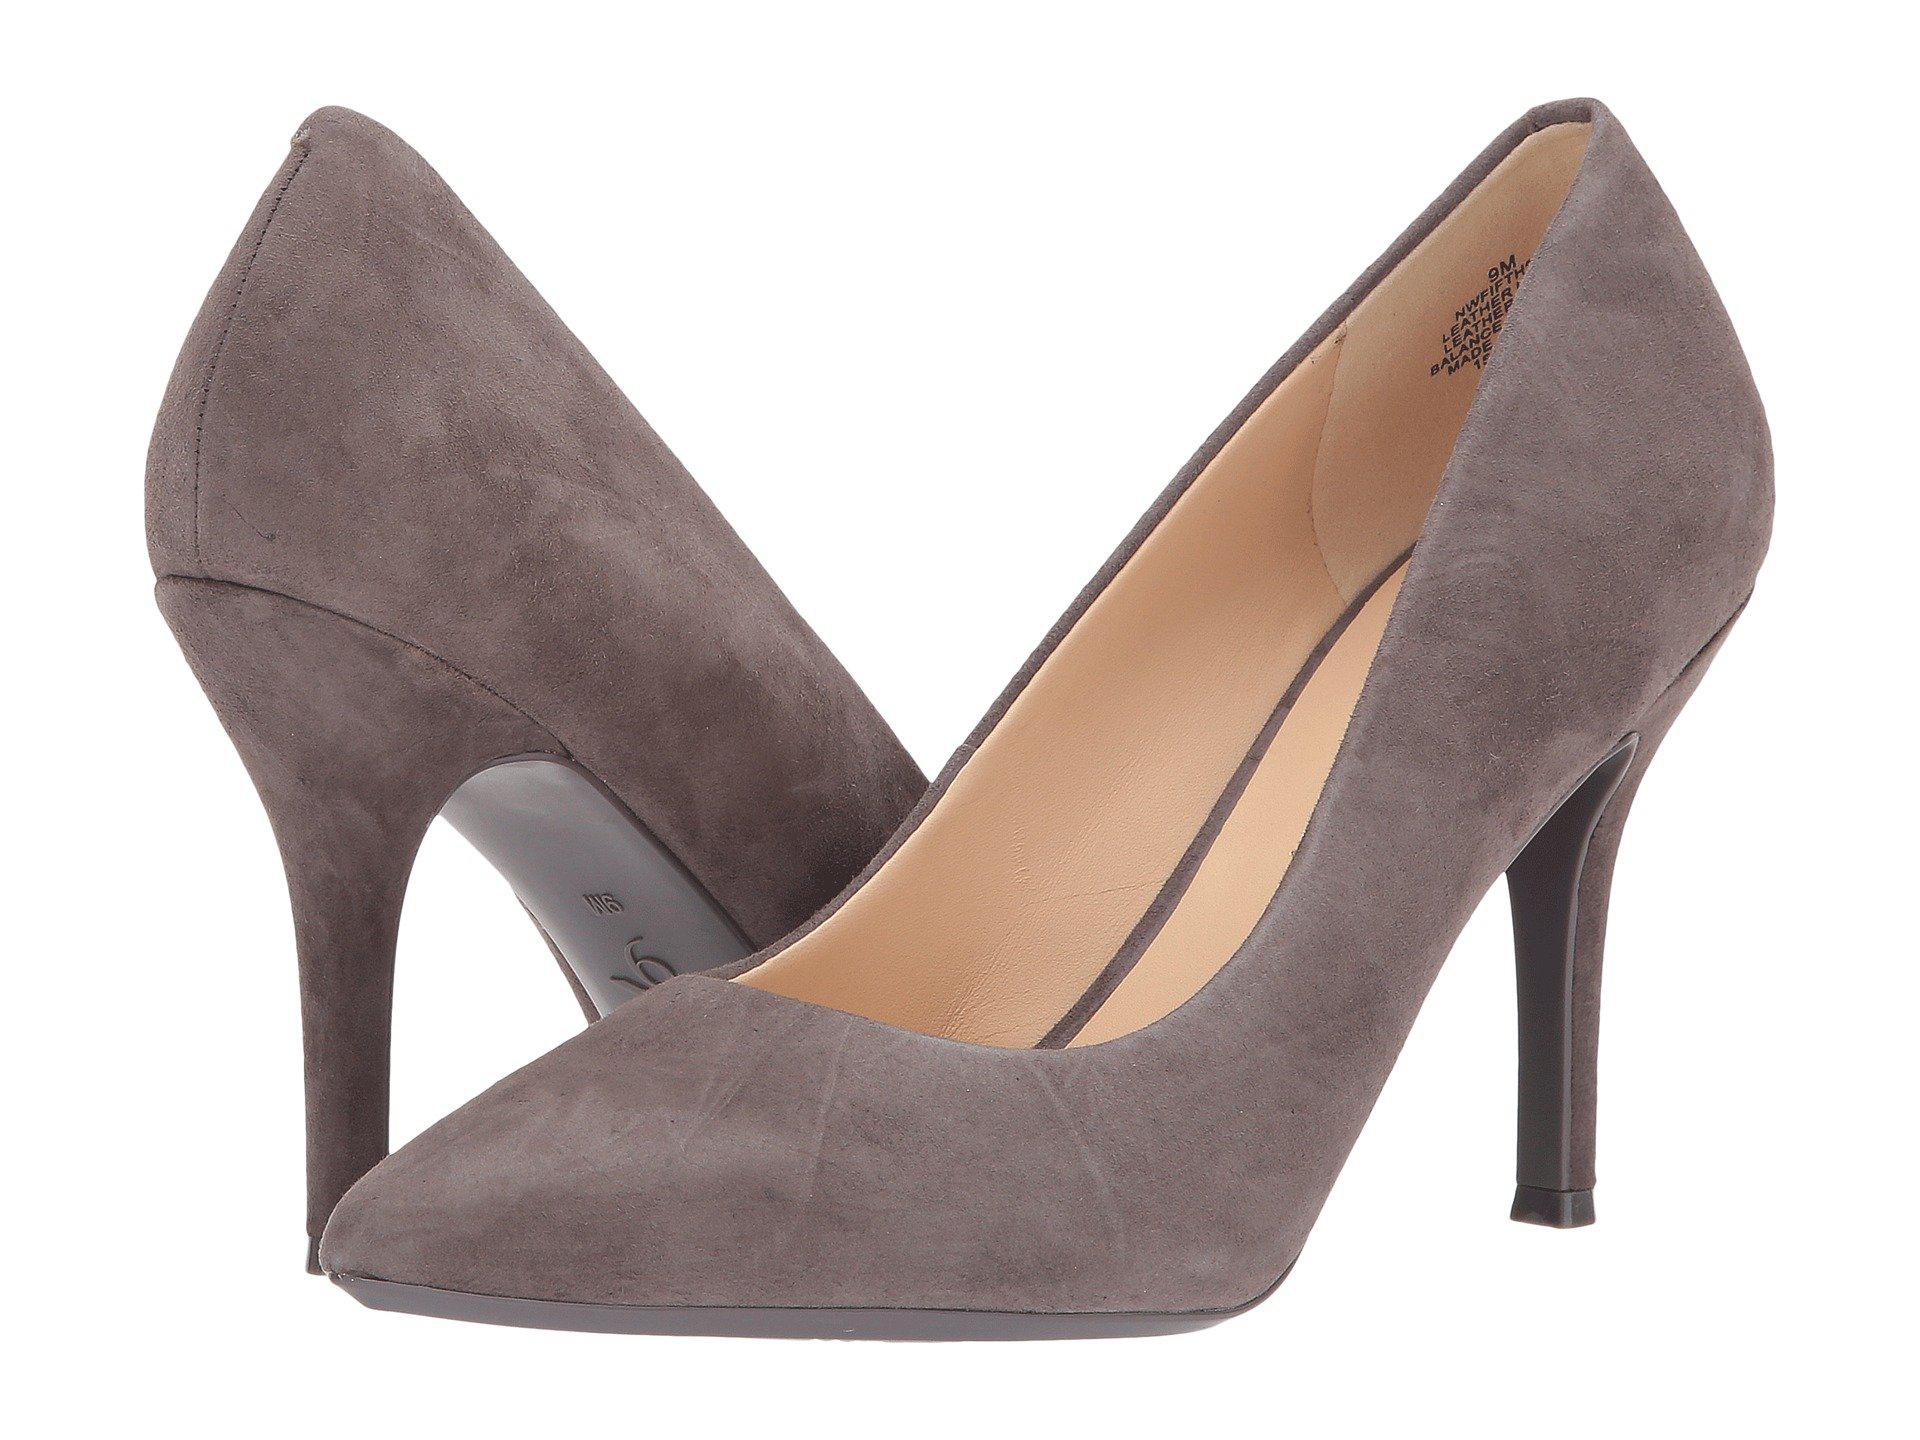 Lyst - Nine West Fifth9x9 Pump in Gray - Save 13.63636363636364%